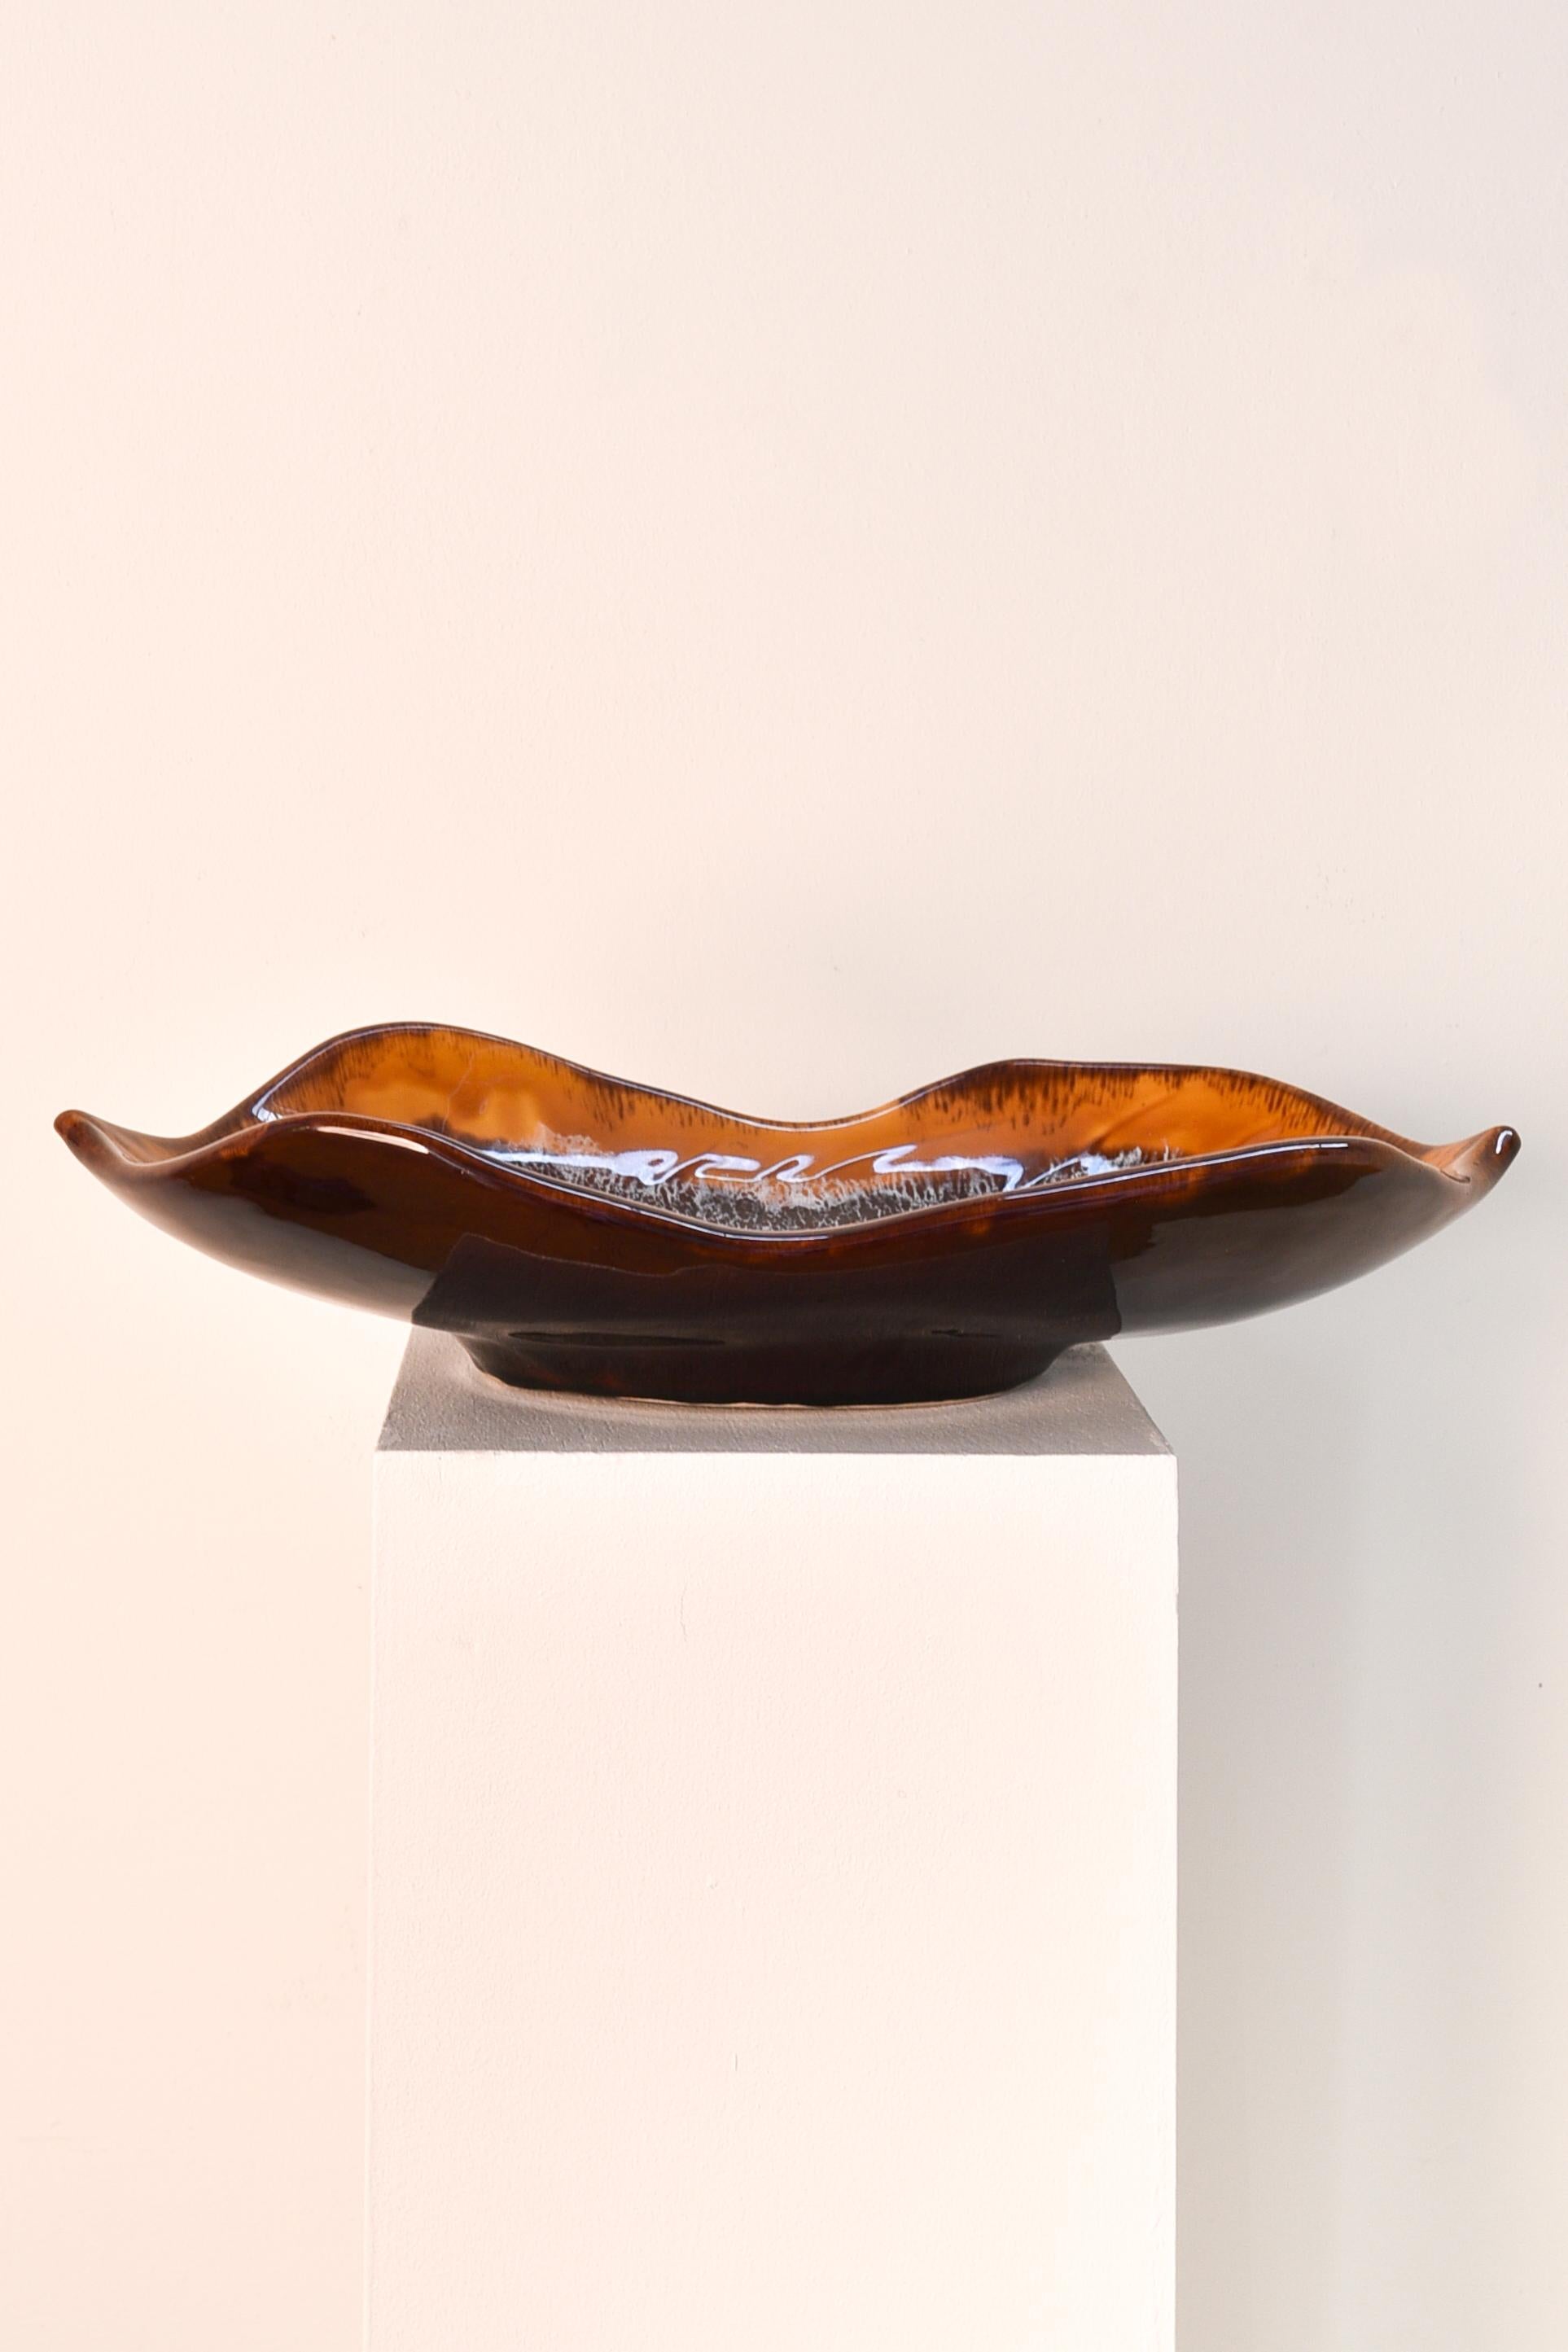 Ceramic tray in the shape of a brown leaf, signed Vallauris.
Vallauris is a town on the French Riviera between Antibes and Cannes and also called 'city of 100 potteries'. It used to be the centre of ceramic pots and became even more popular when